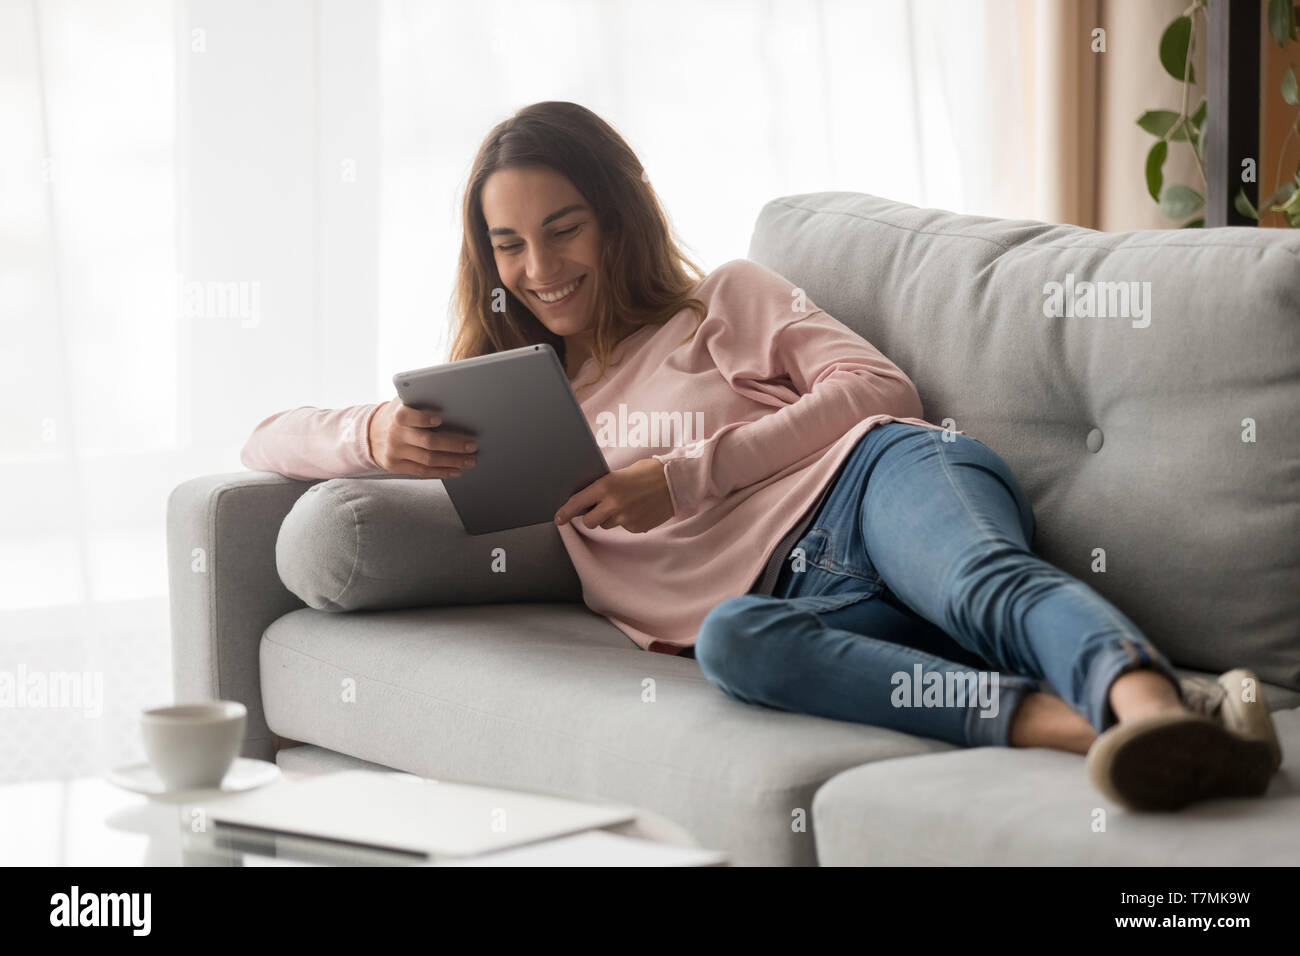 Woman lying on couch with tablet spending time at home Stock Photo